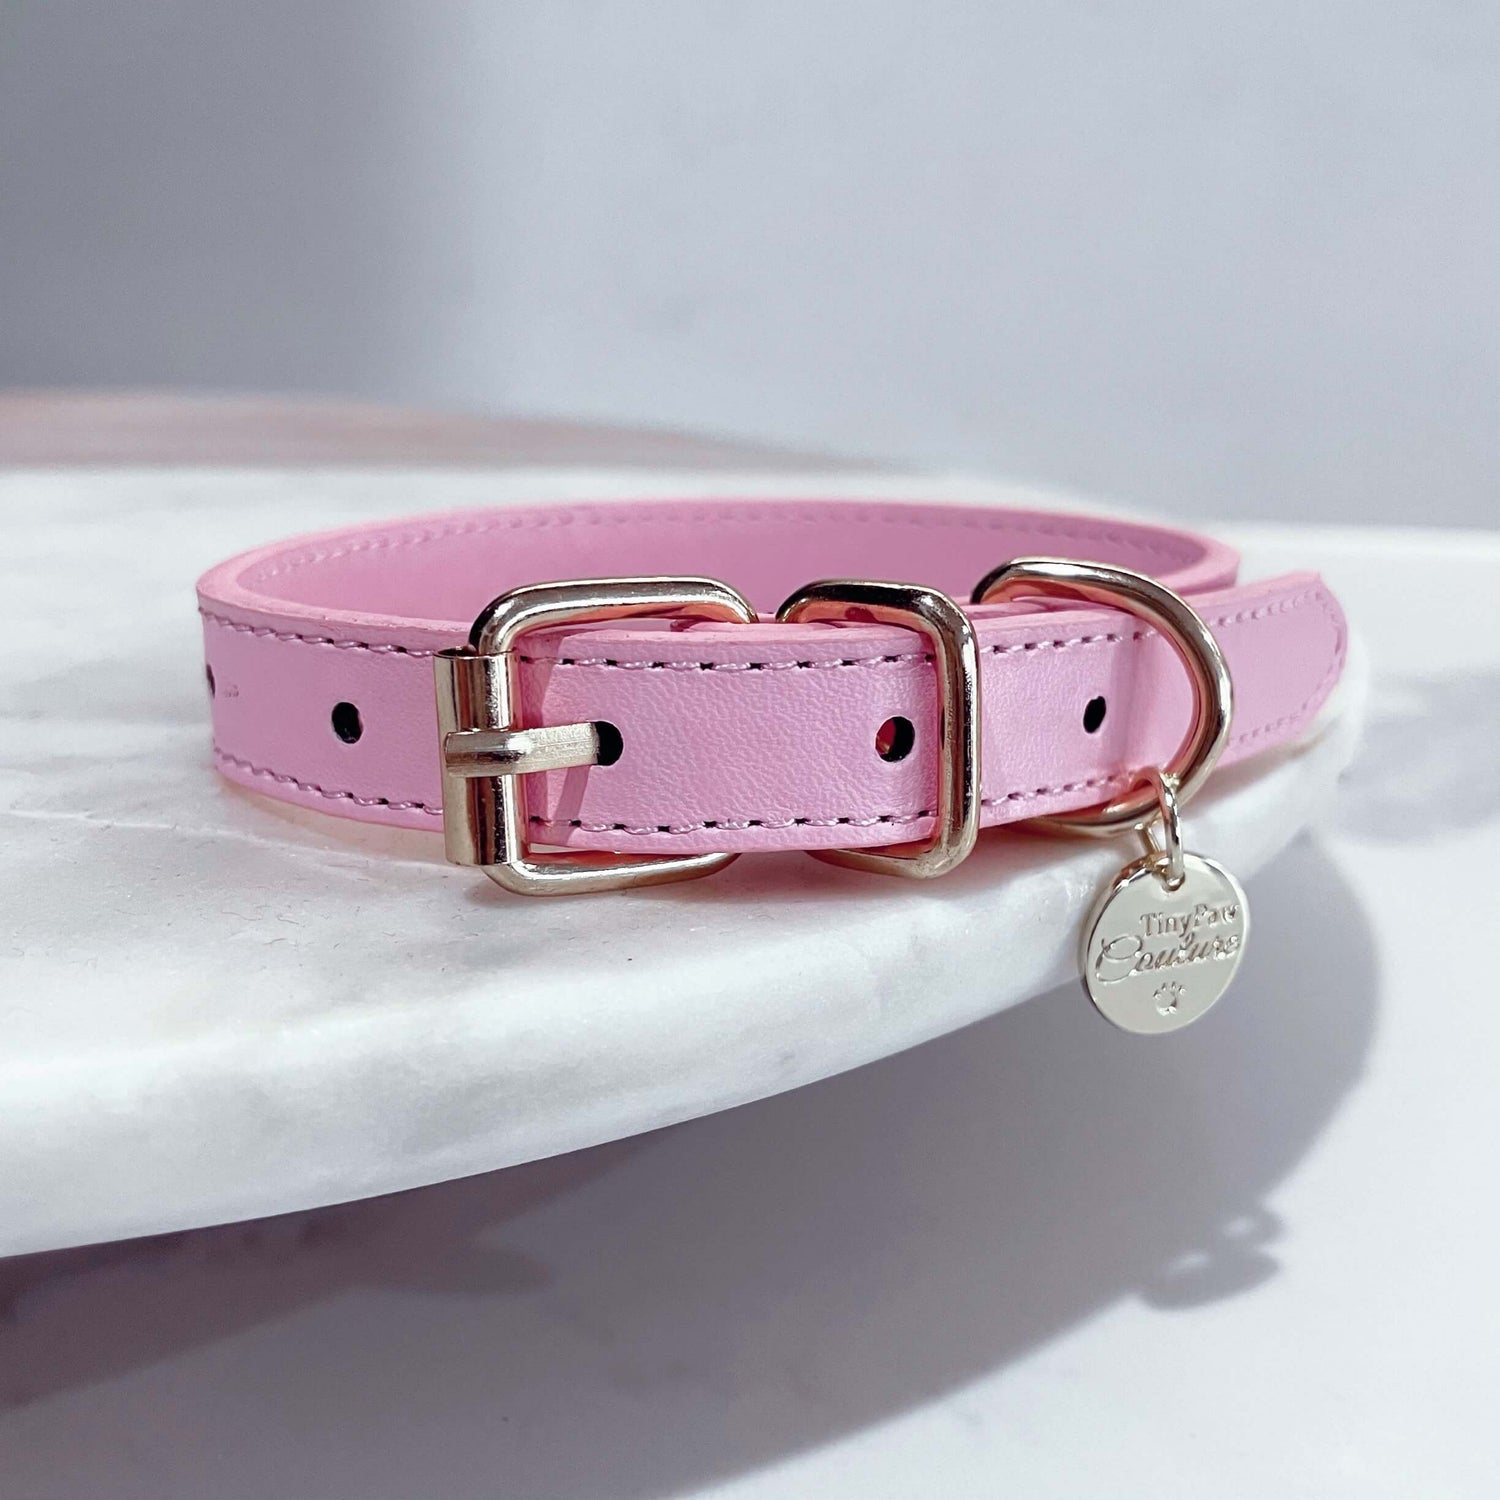 Little Luxe Leather Collars